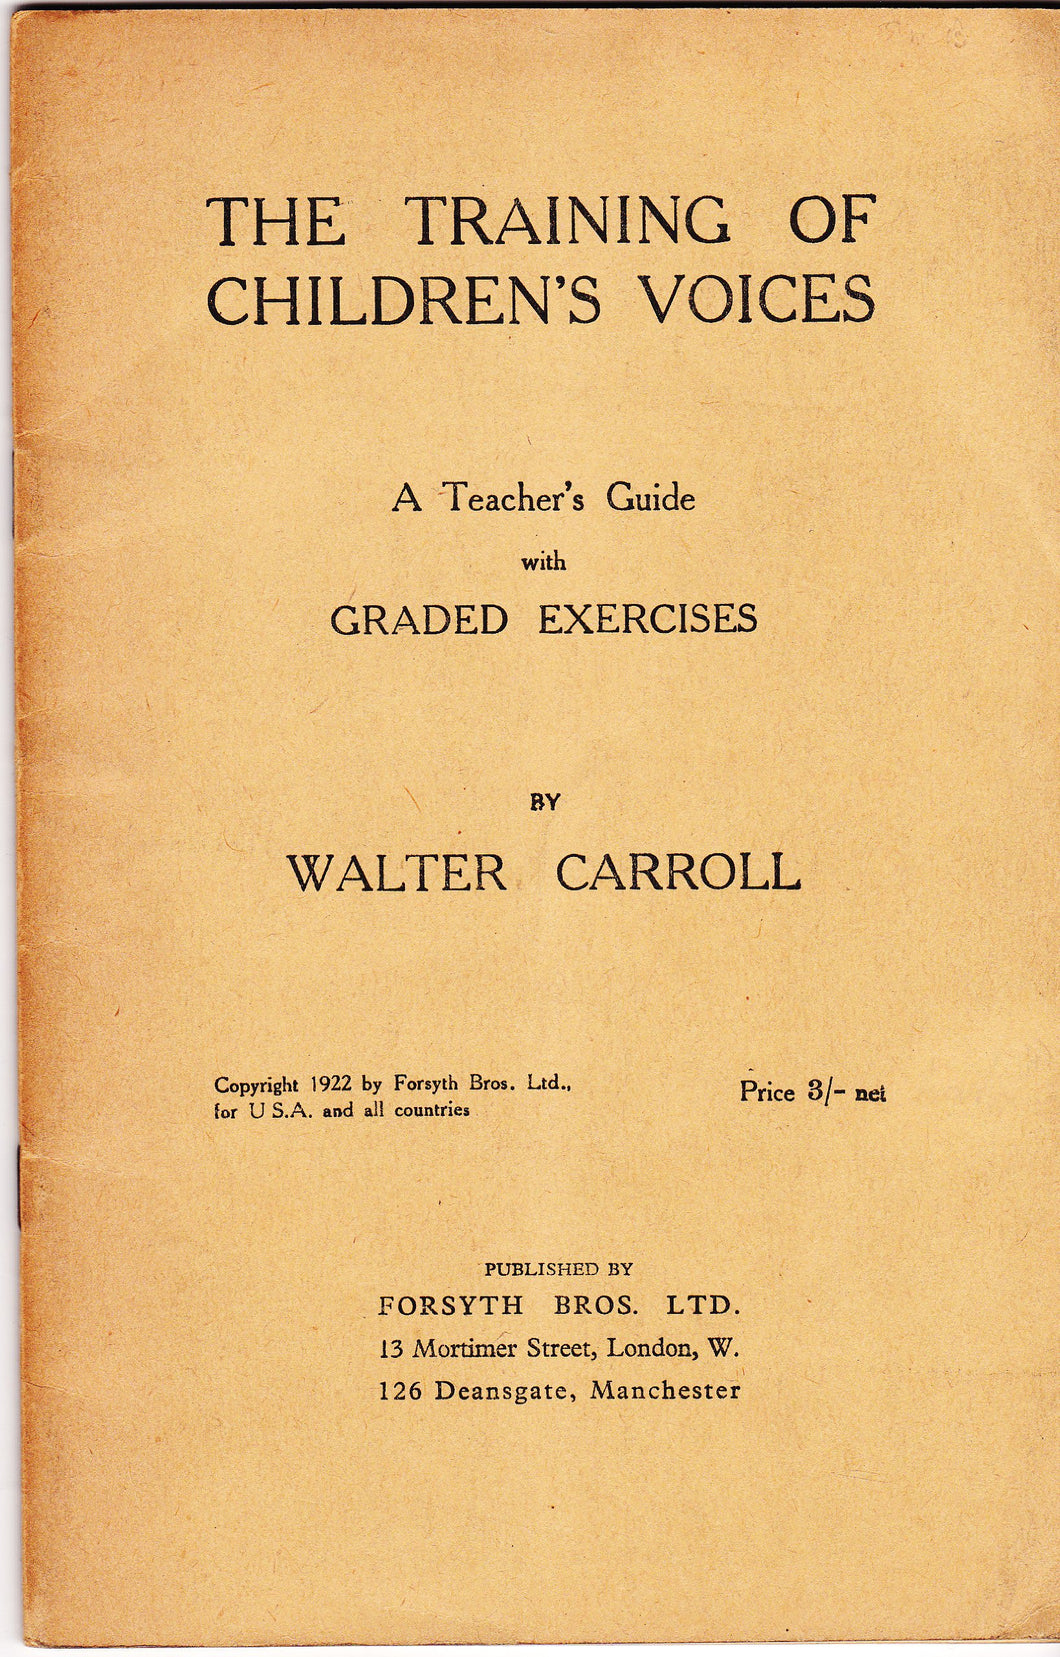 The Training of Children's Voices: A Teacher's Guide With Graded Exercises [Paperback] Walter Carroll